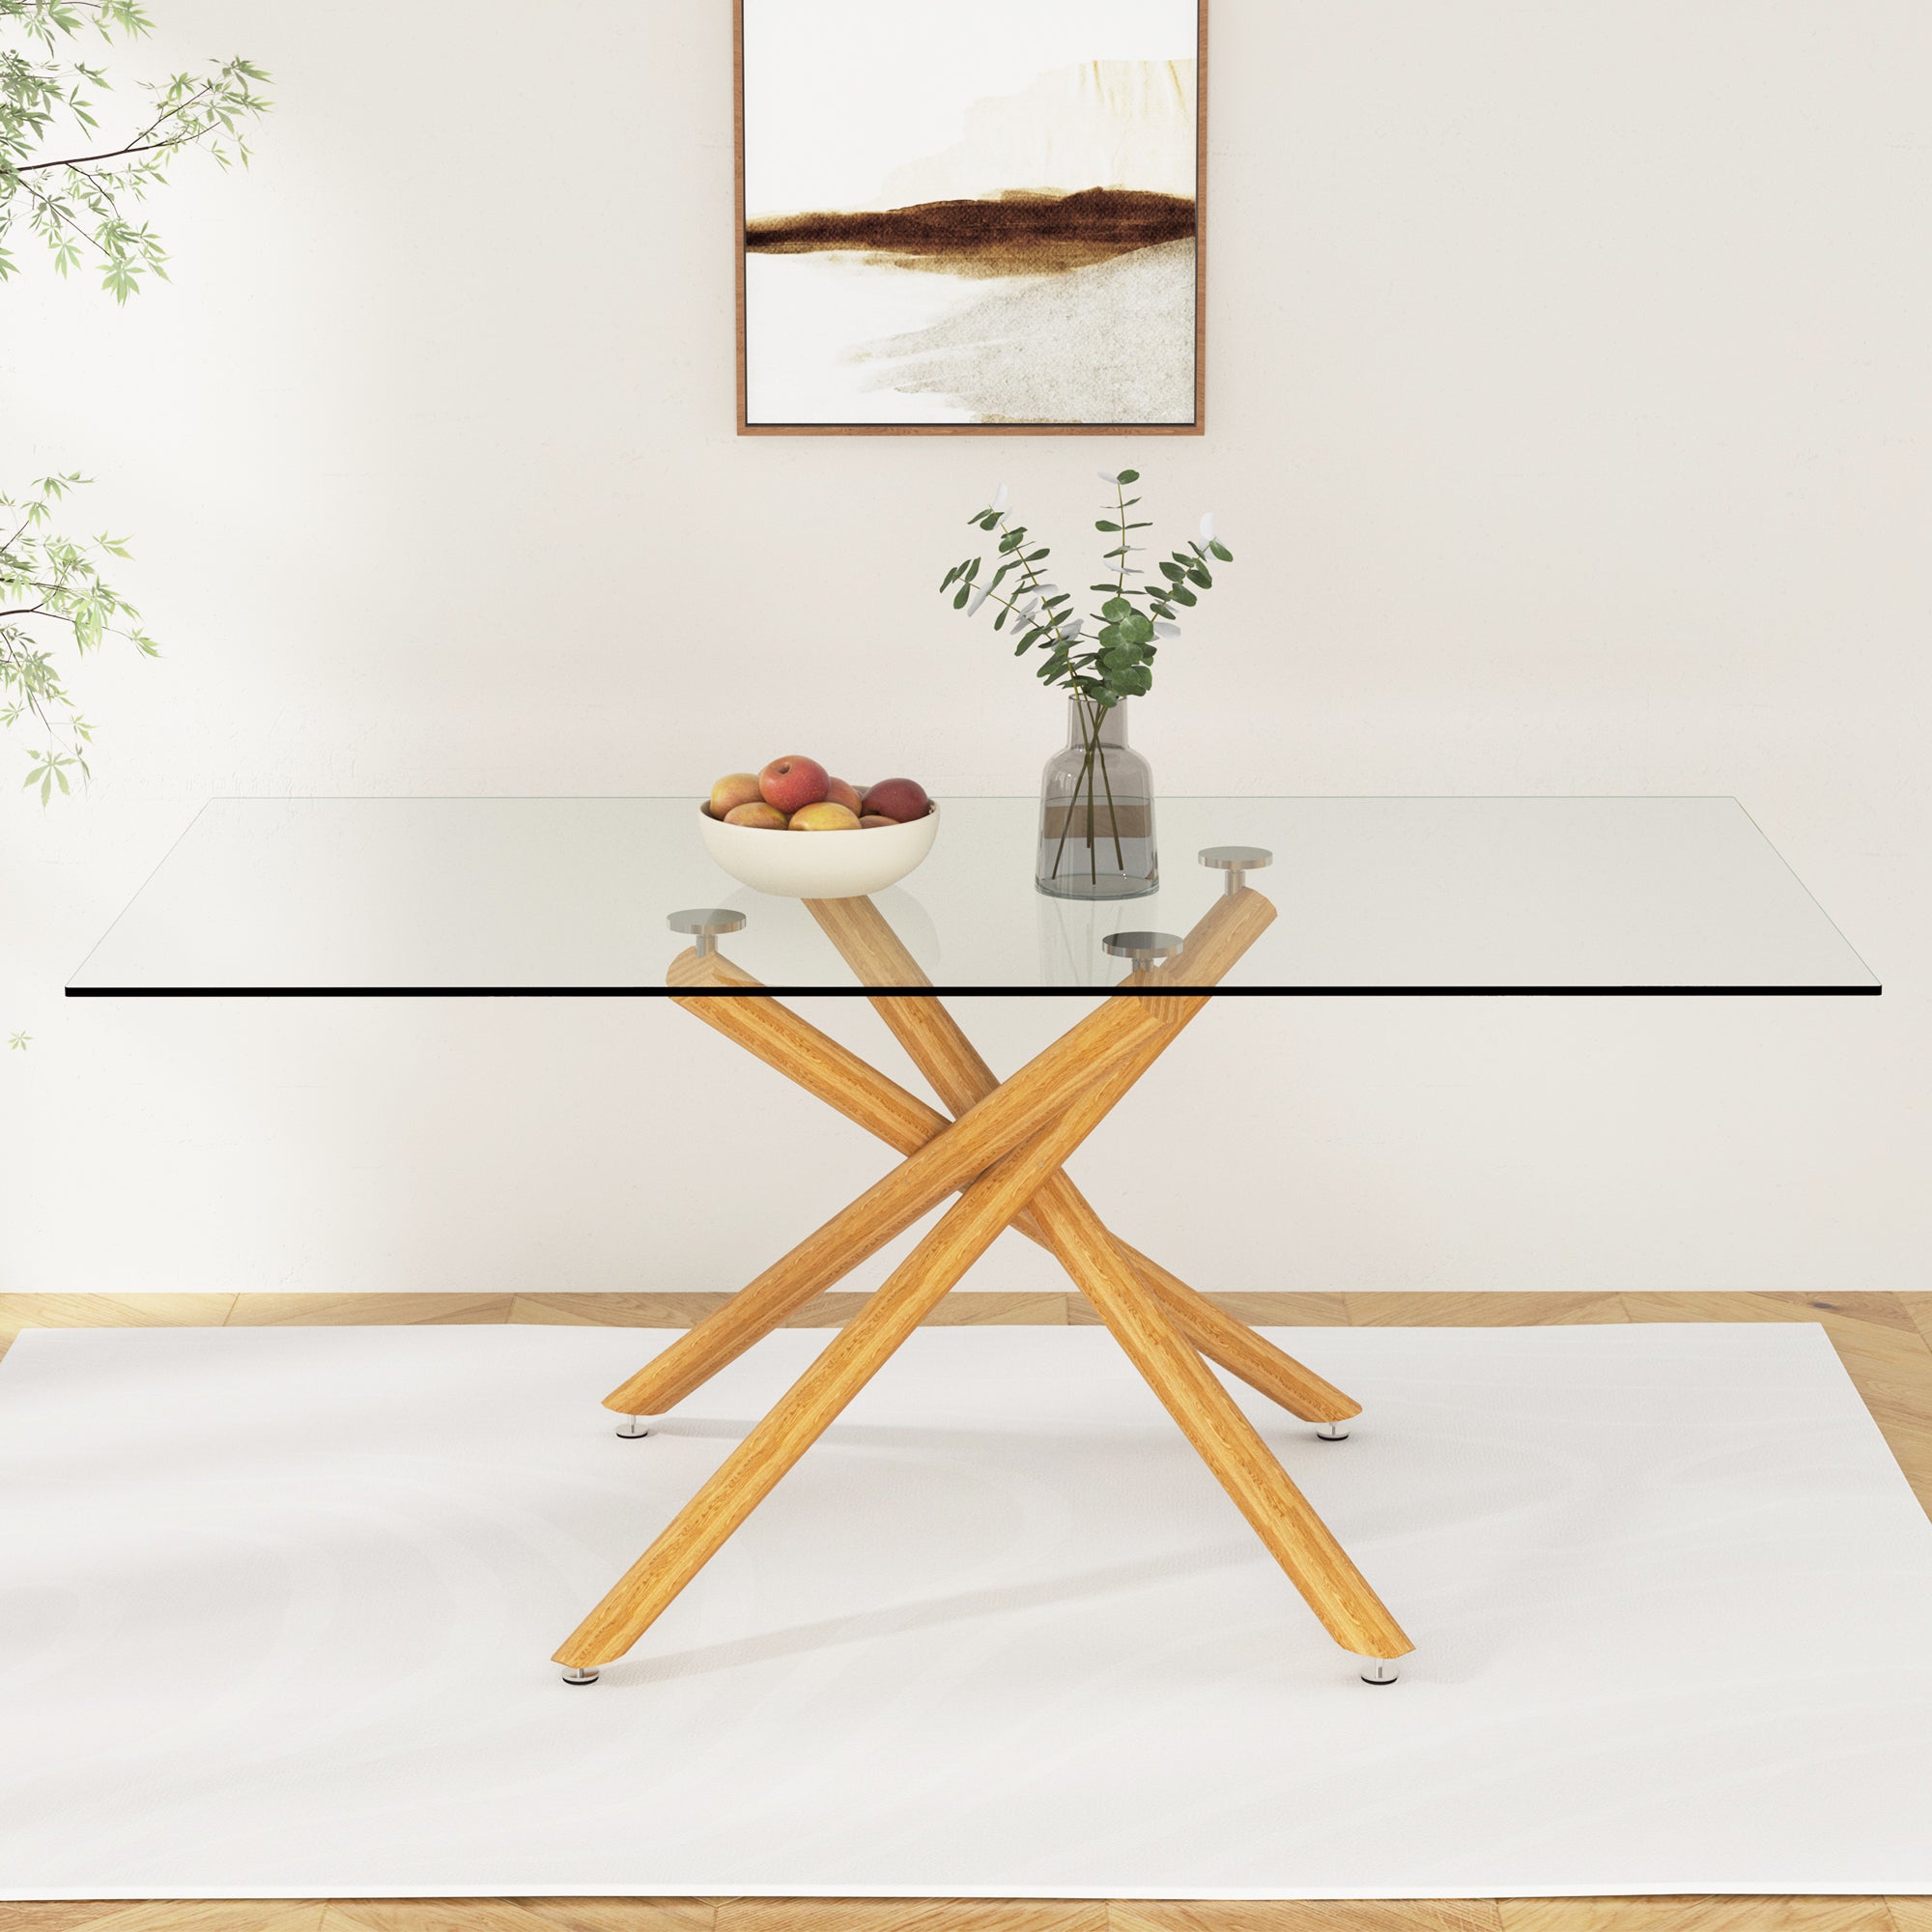 Modern Minimalist Rectangular Glass Dining Table for 6-8 with 0.39" Tempered Glass Tabletop and Wood color Metal Legs